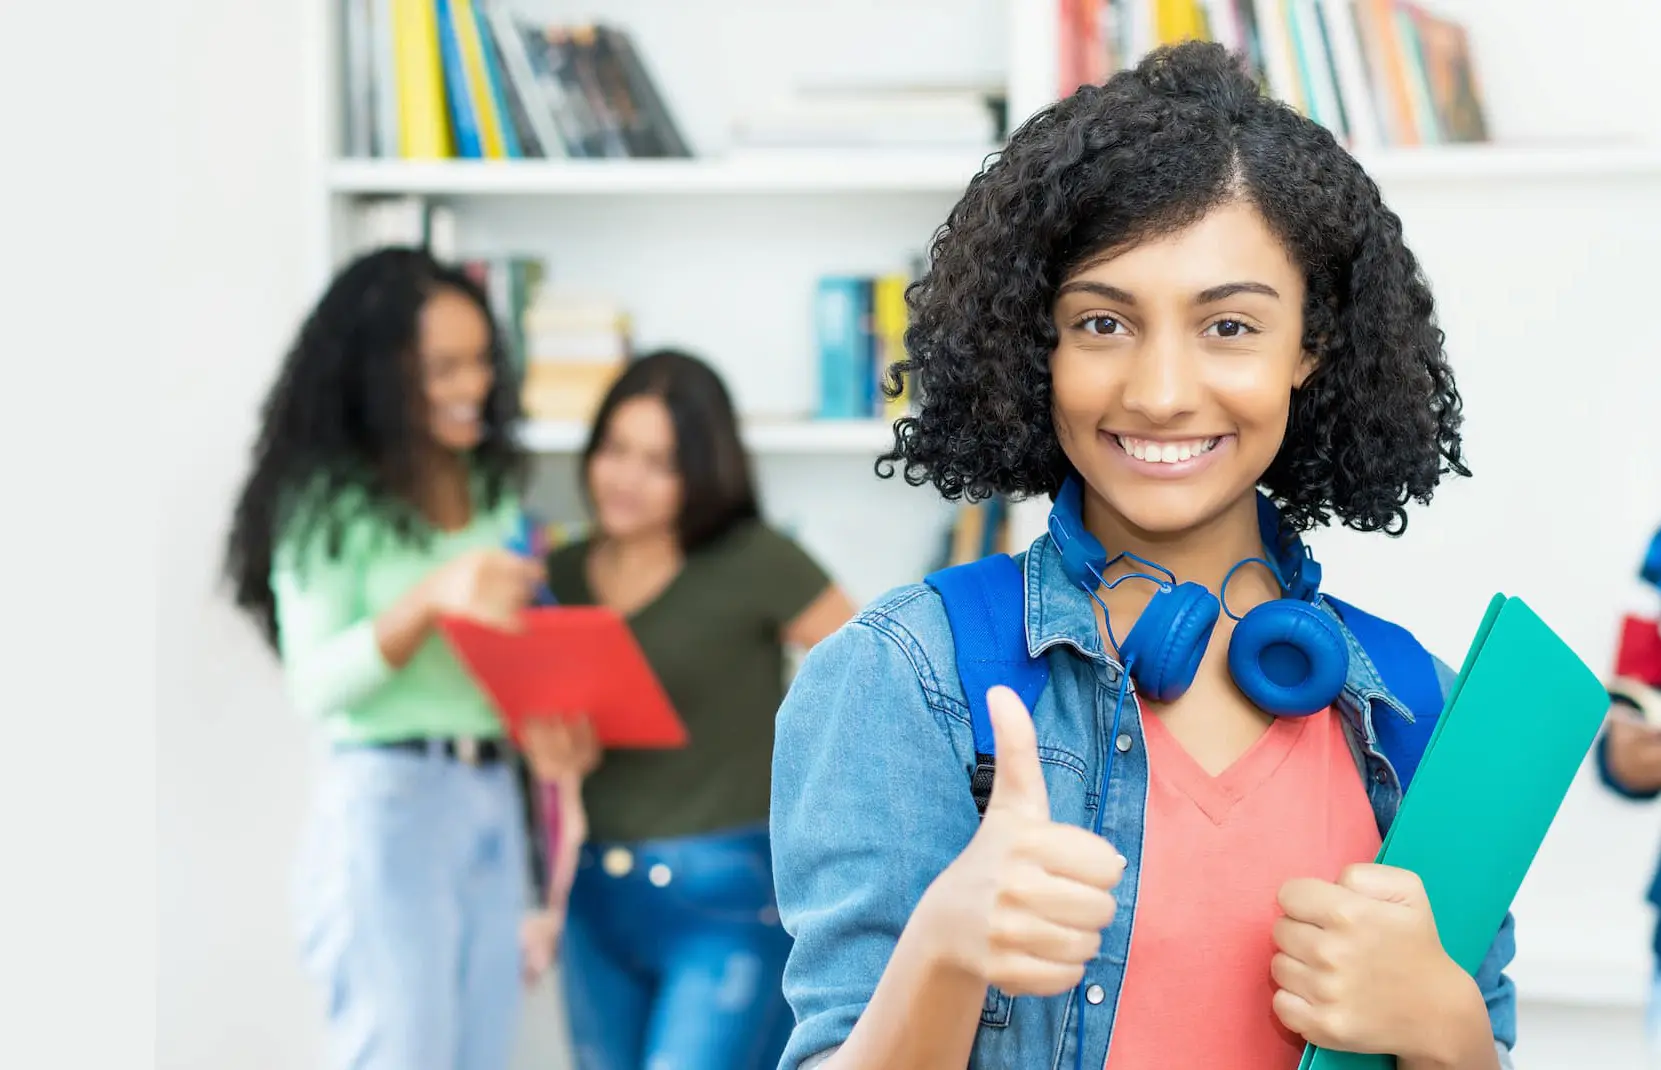 A female student holding books while smiling and giving a thumbs up, with other students in the background.